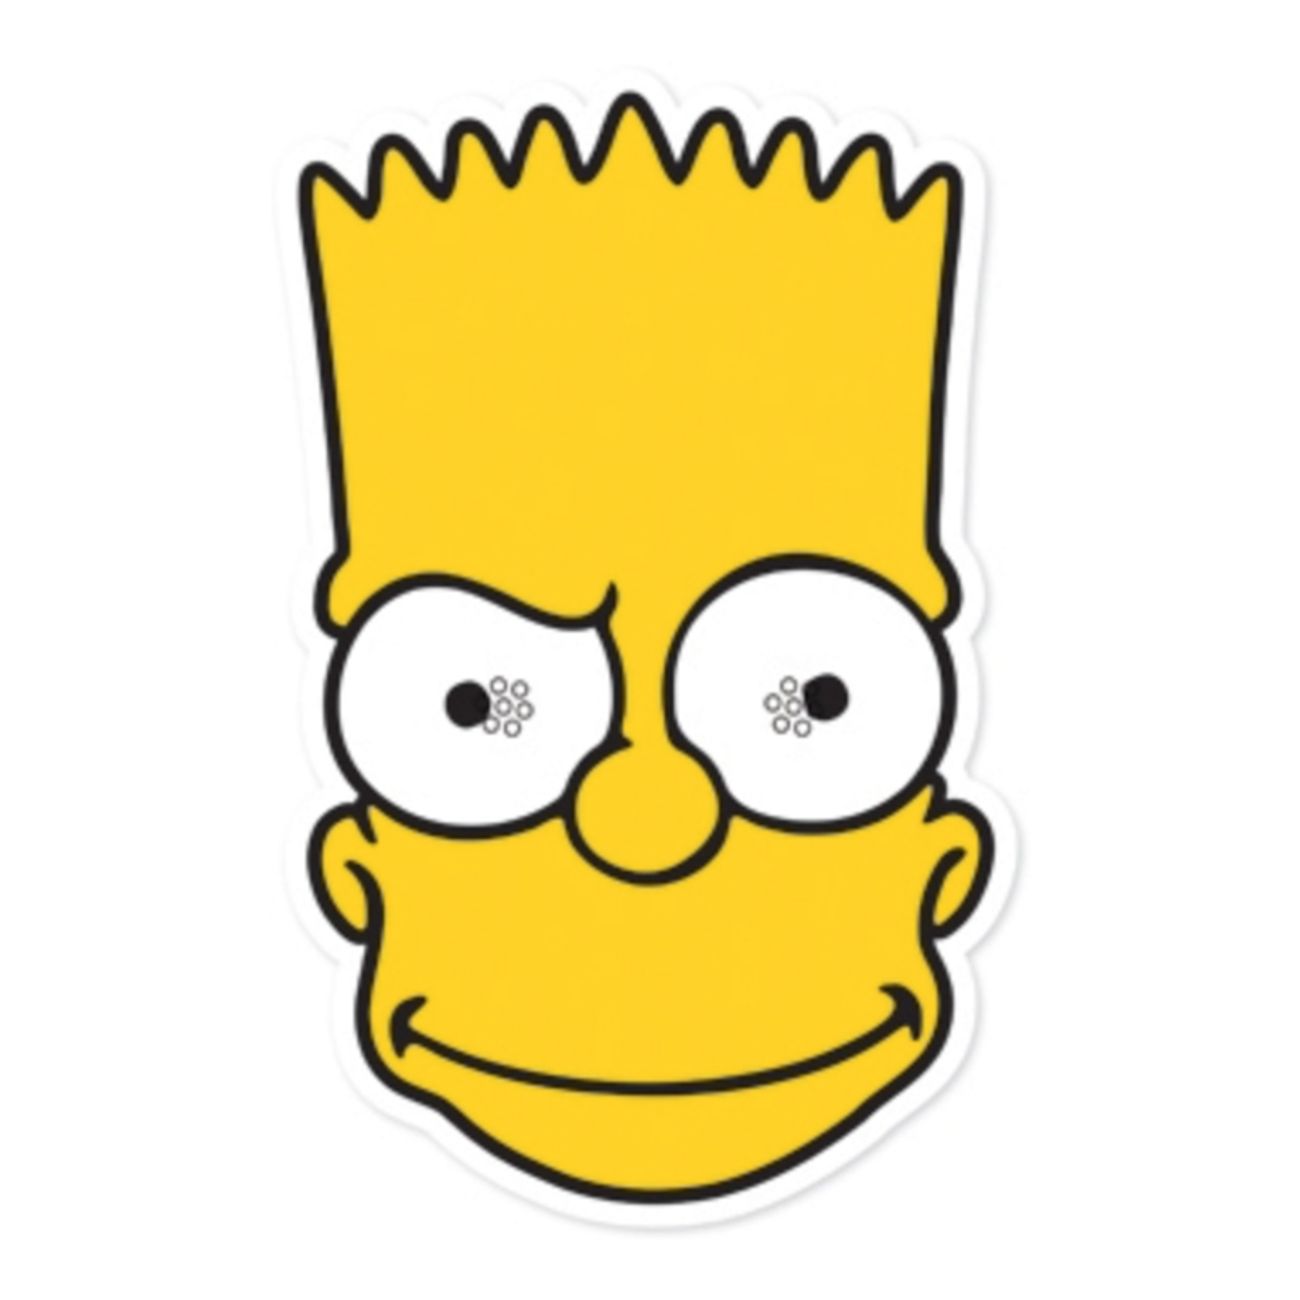 bart-simpson-pappmask-1